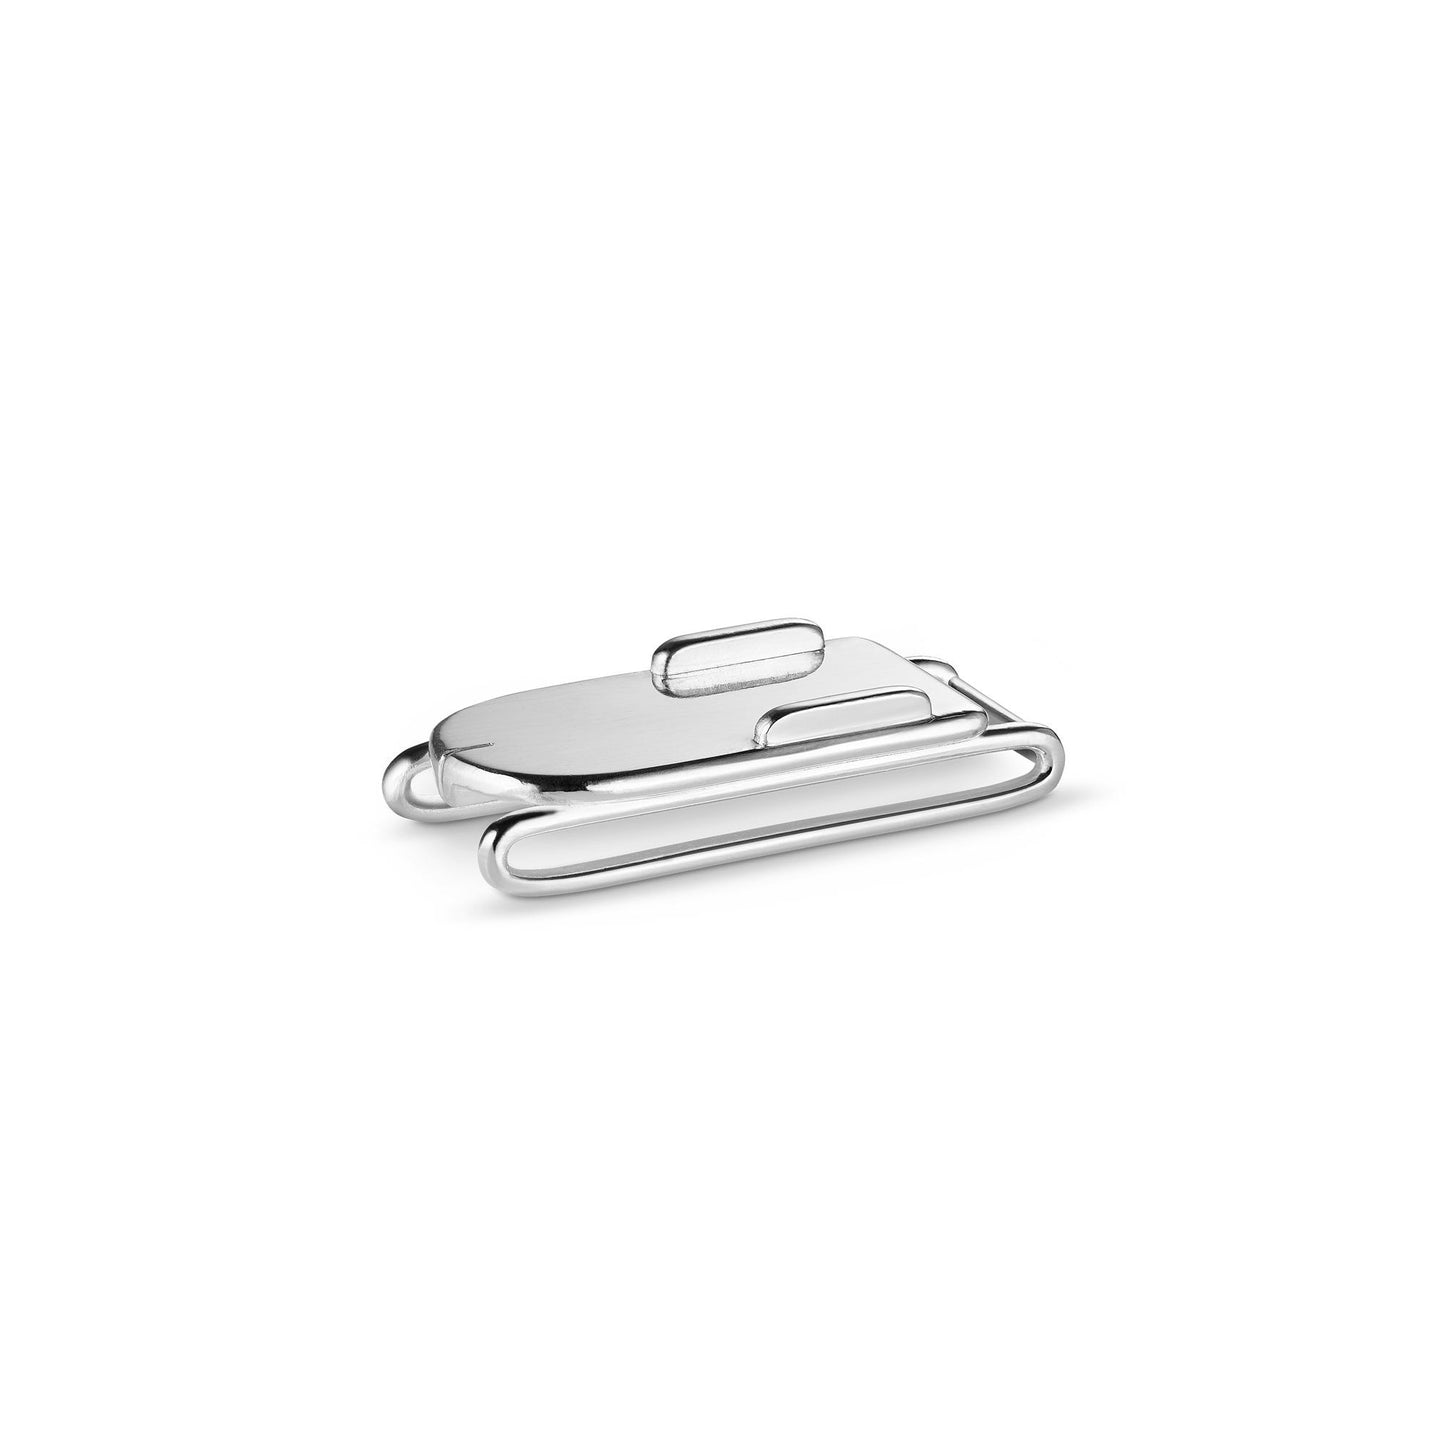 St Moritz Place Card Holders in Sterling Silver, Set of 6